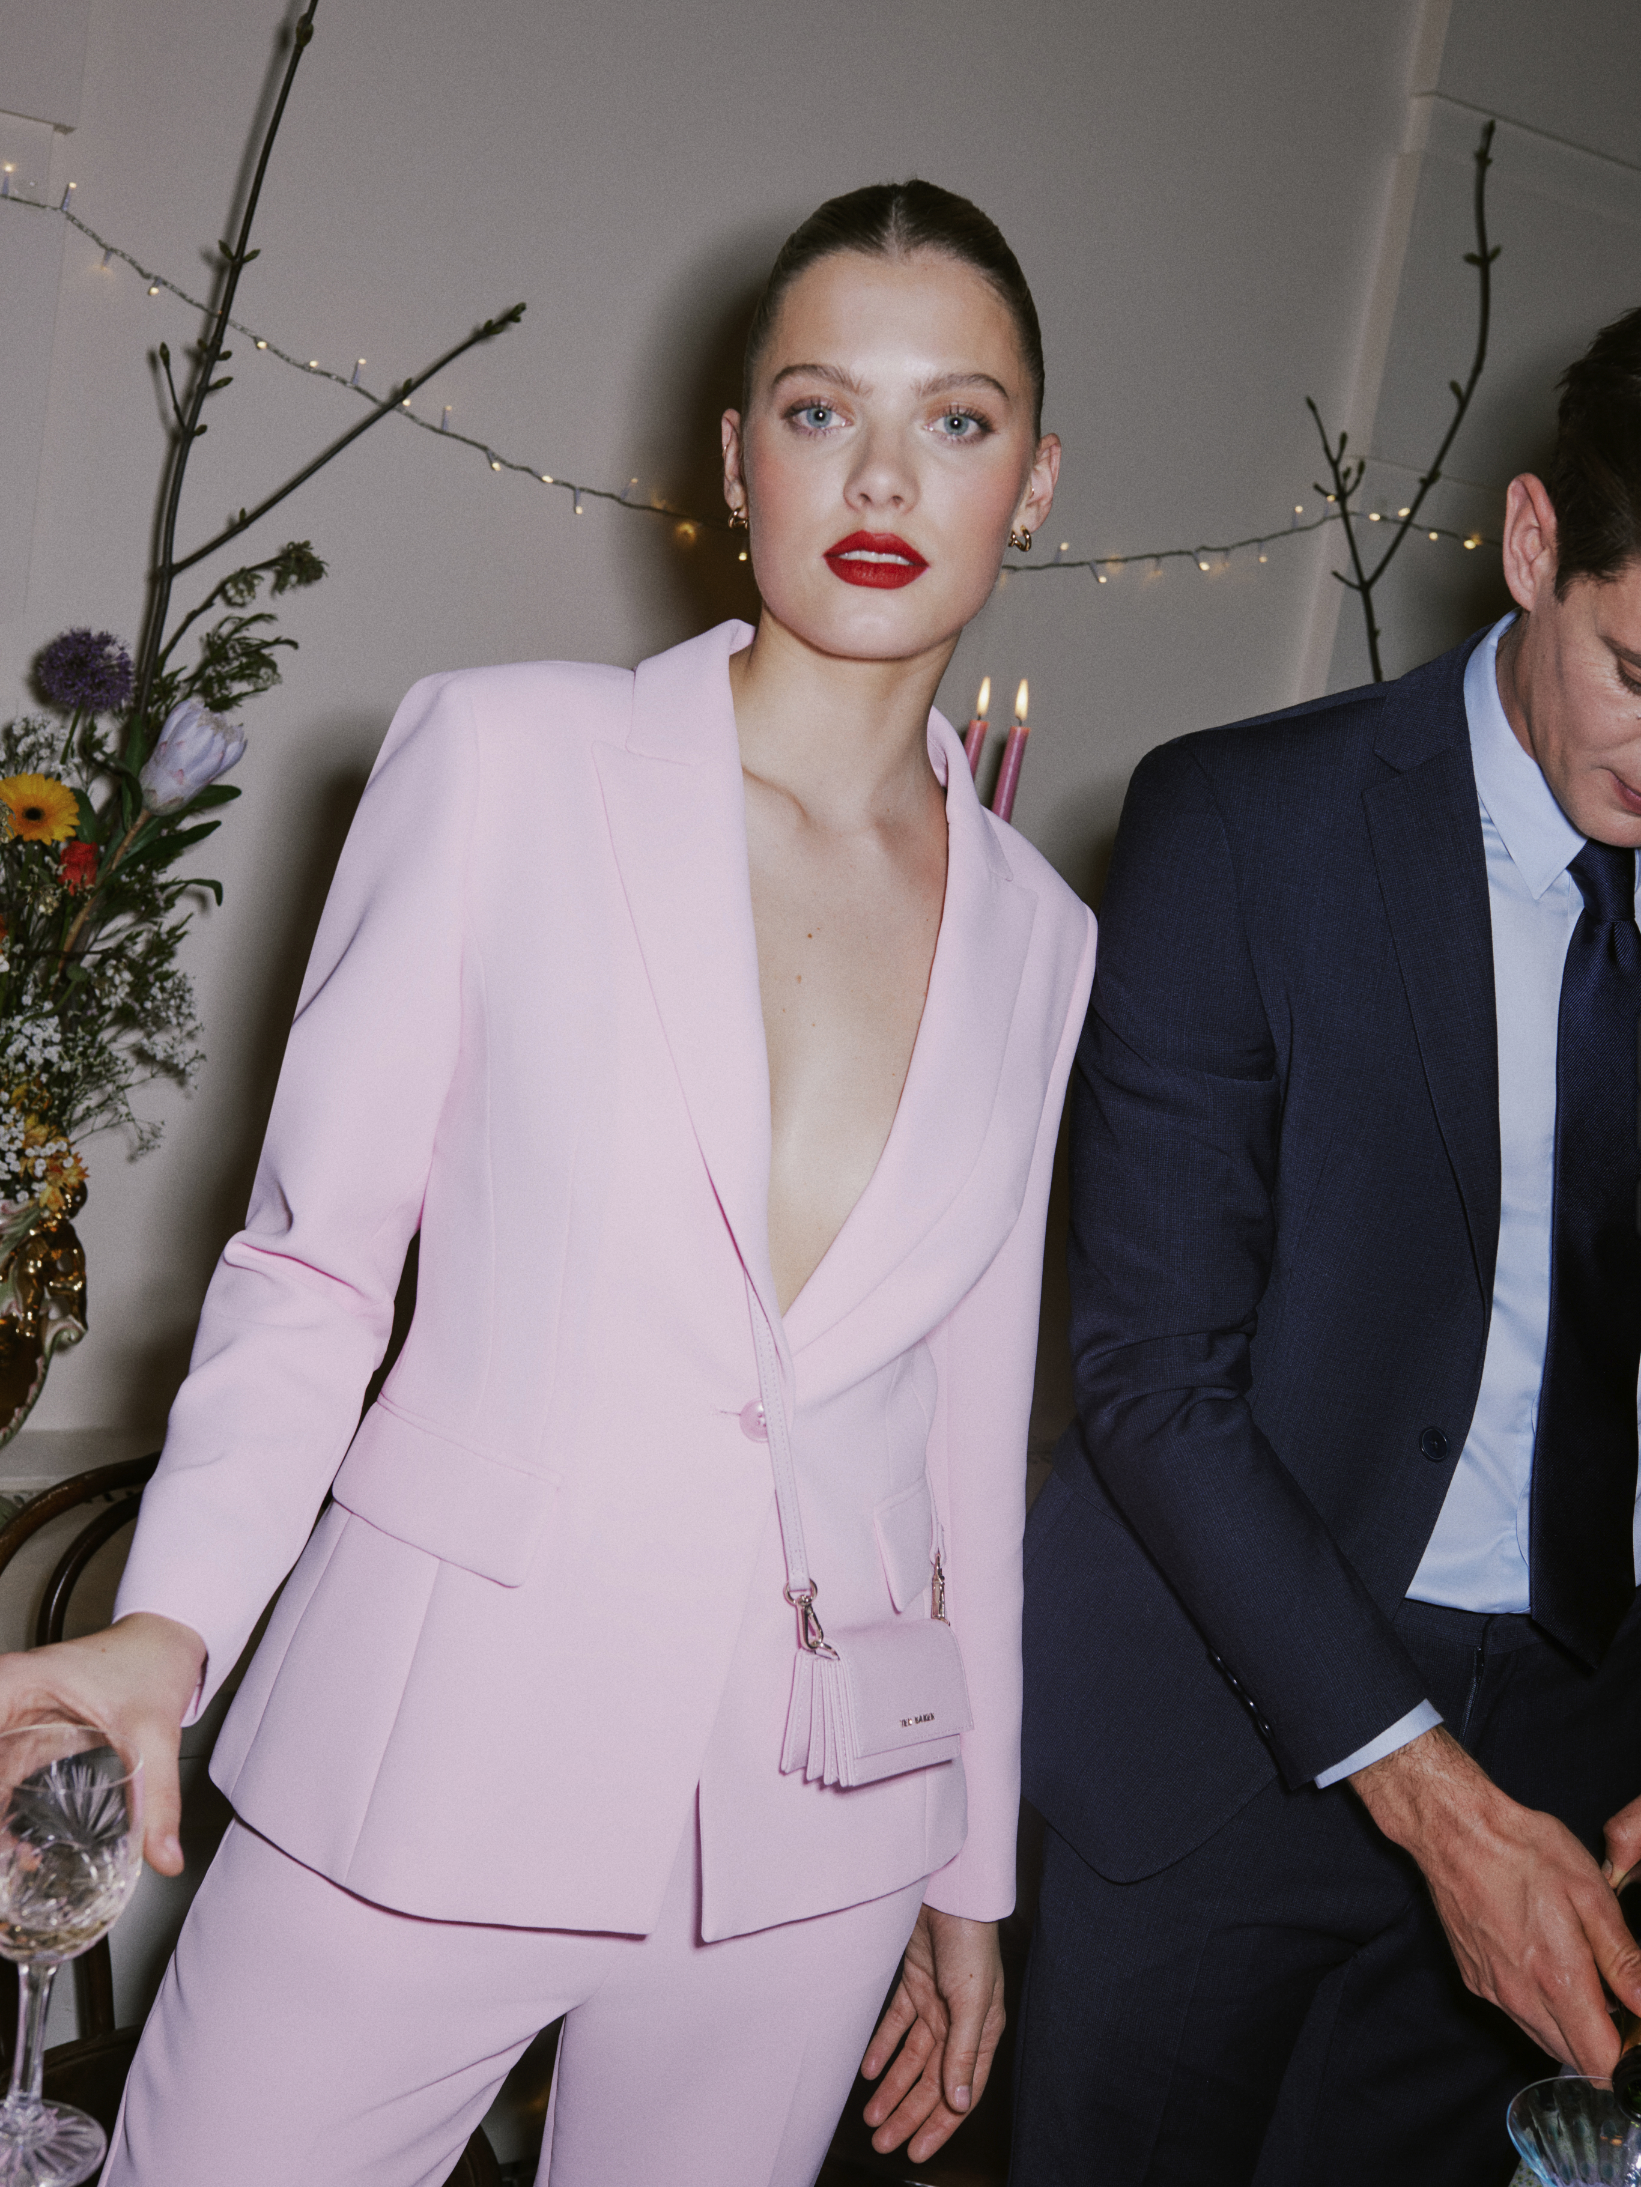 Make It A Moment | Ted Baker Women's & Men's Occasionwear | Ted